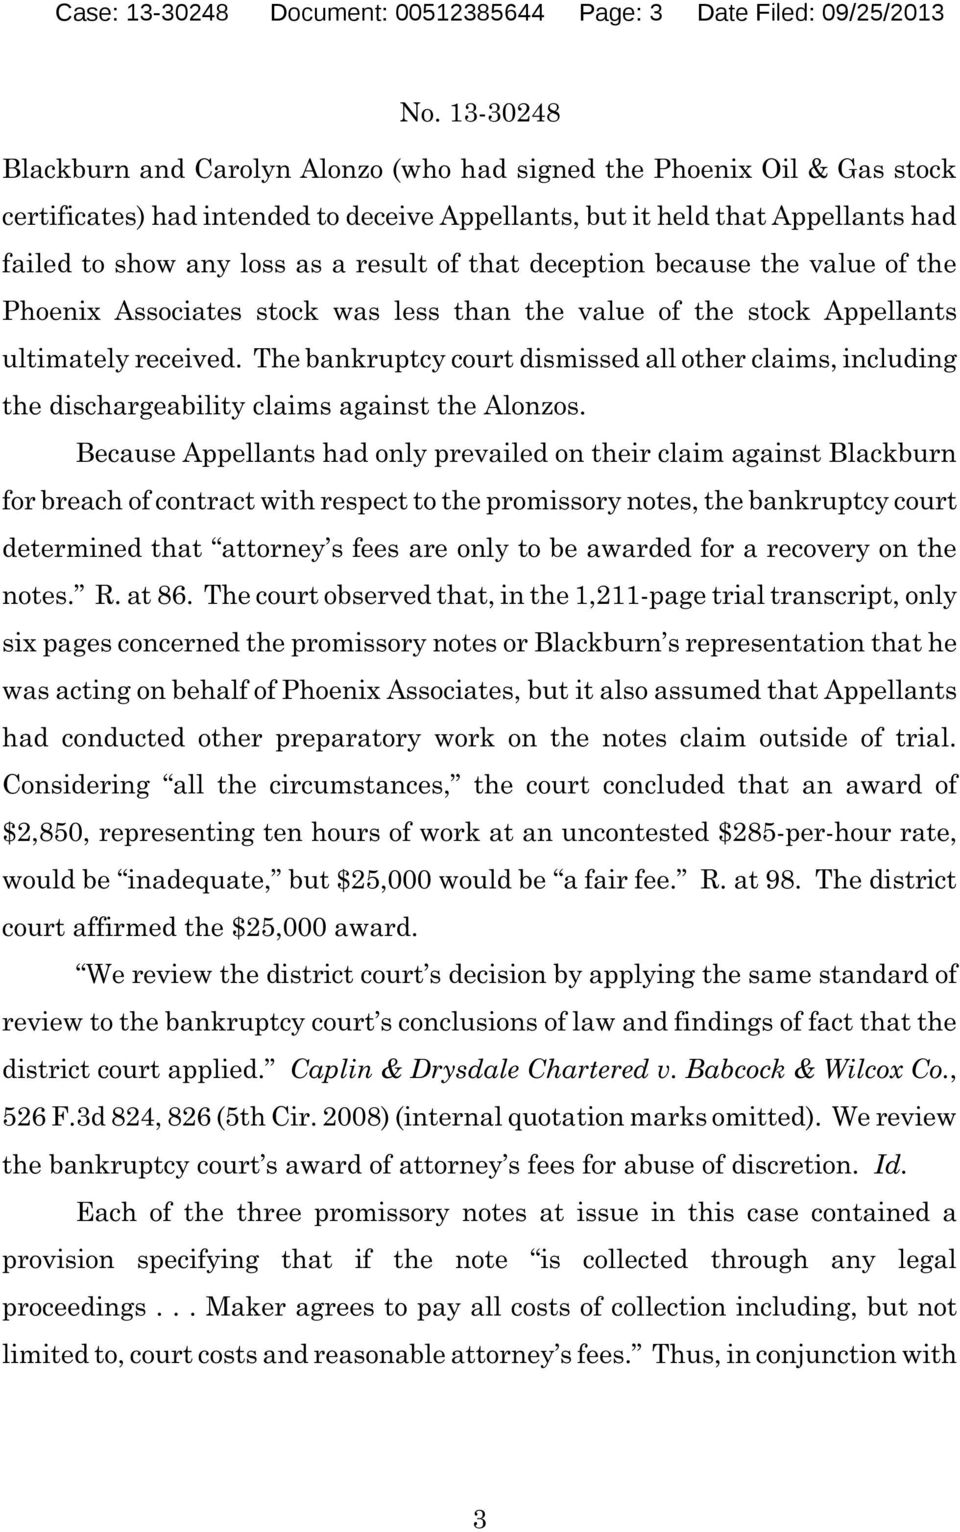 The bankruptcy court dismissed all other claims, including the dischargeability claims against the Alonzos.